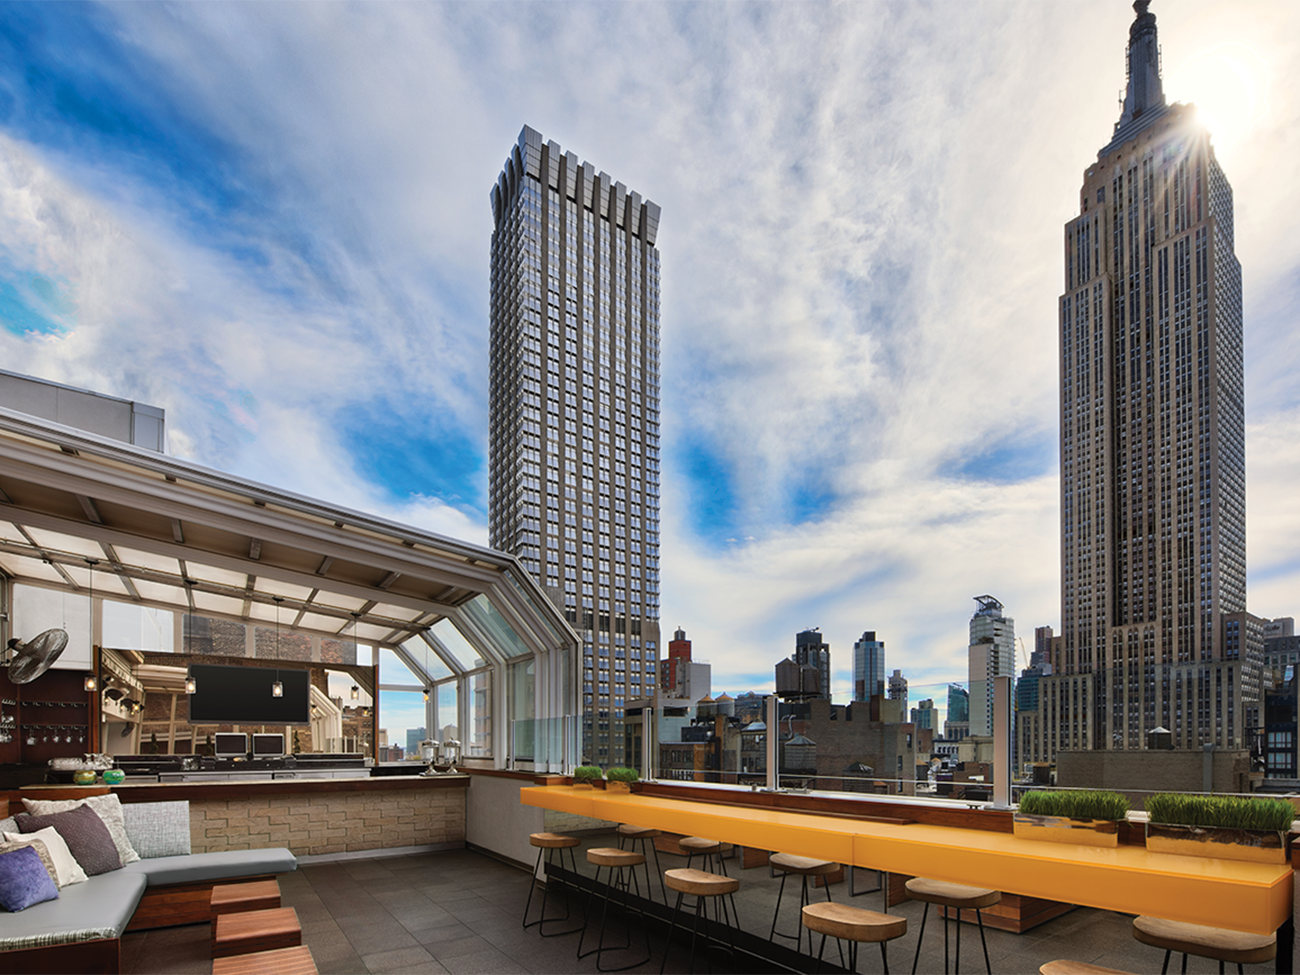 Image of Marriott Vacation Club, New York City in New York City.